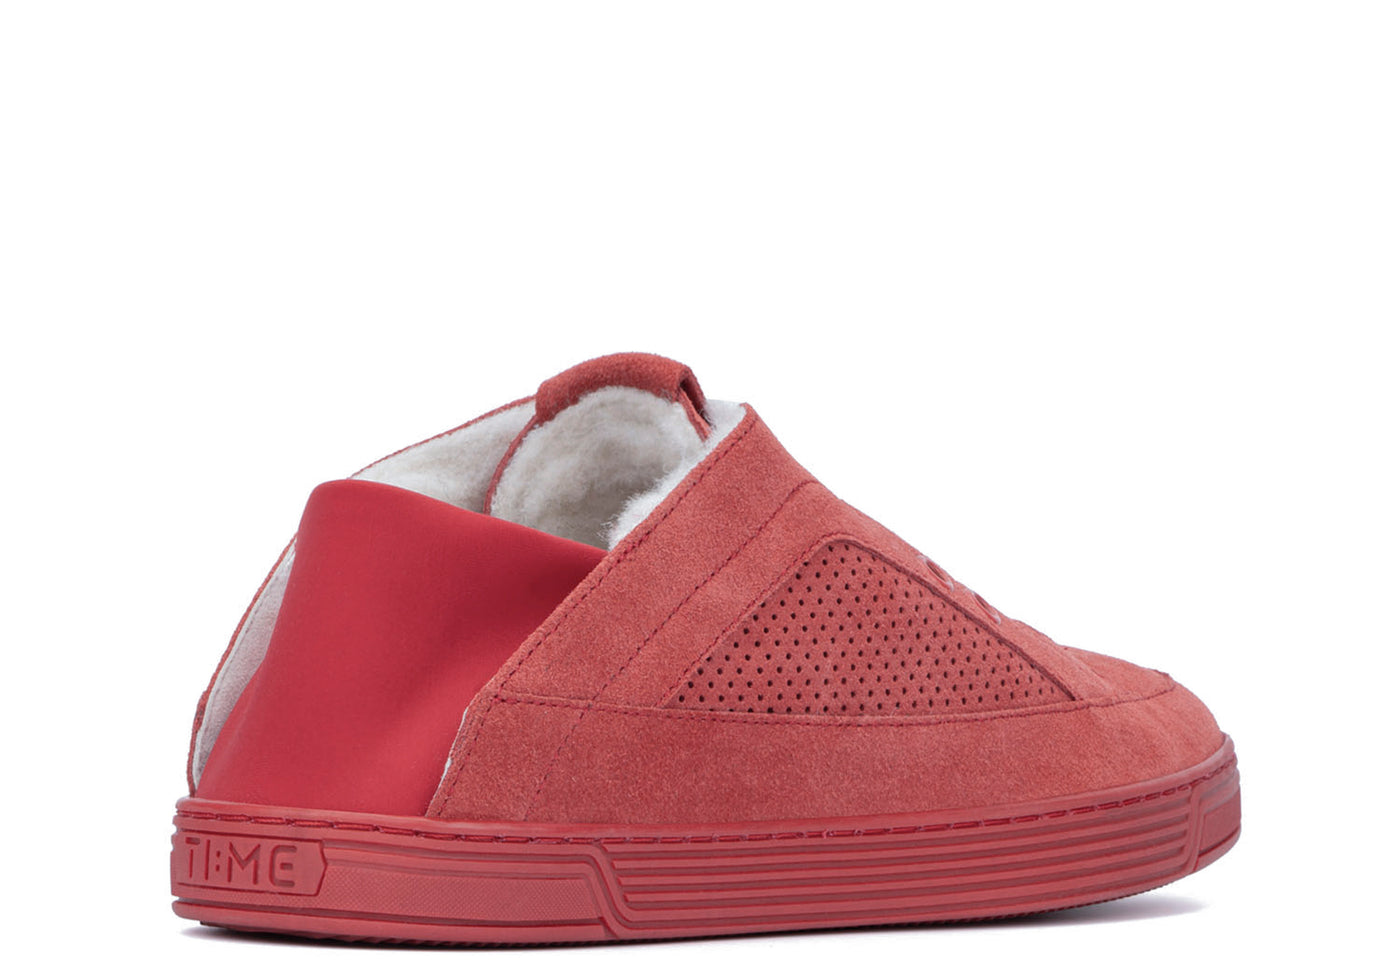 TIME Slippers-Women's Low-top Slippers, #color_suede-candy-red